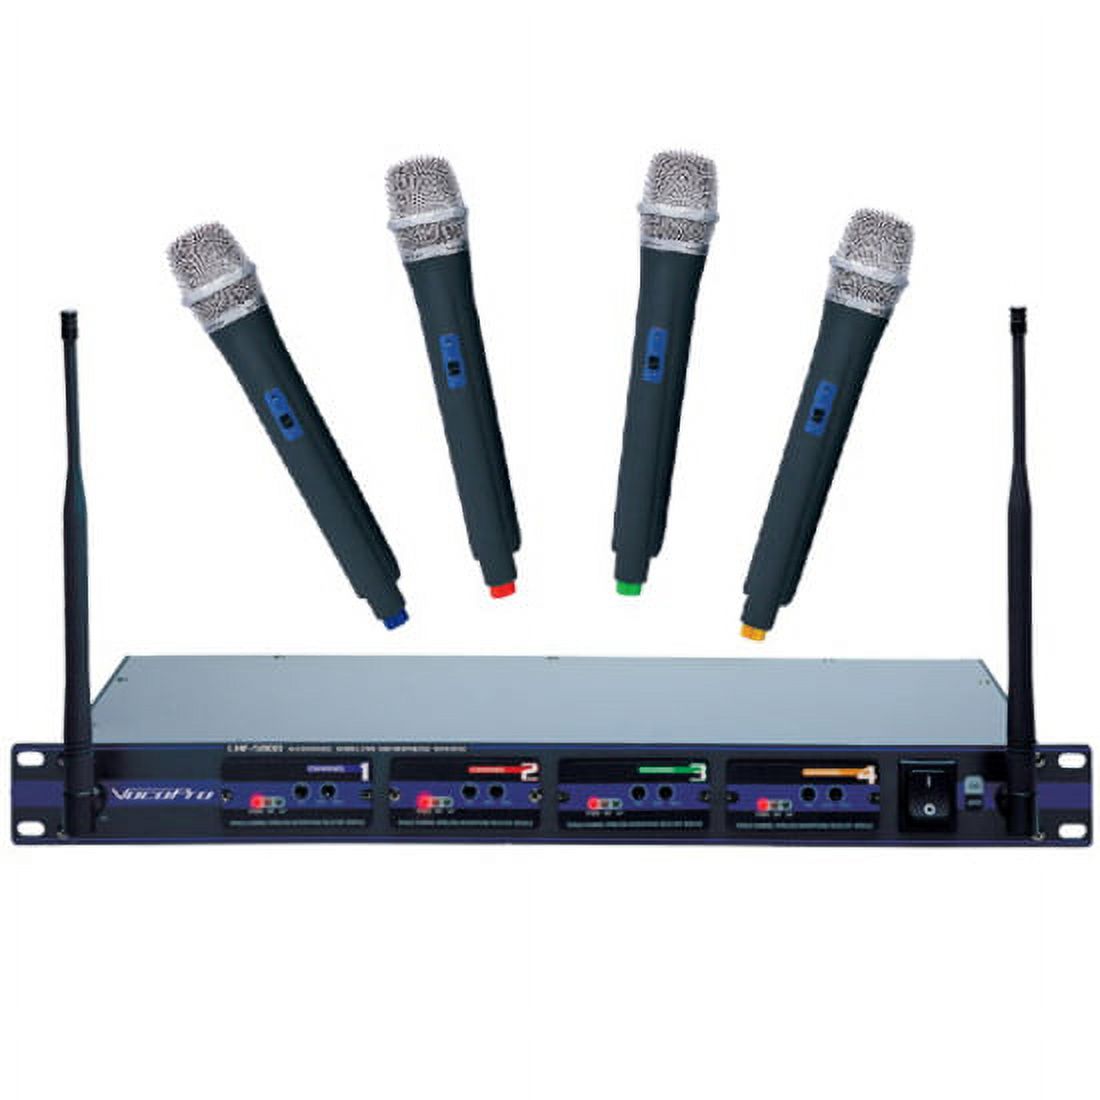 VocoPro UHF-5800 4-Channel Wireless Microphone System - image 1 of 1